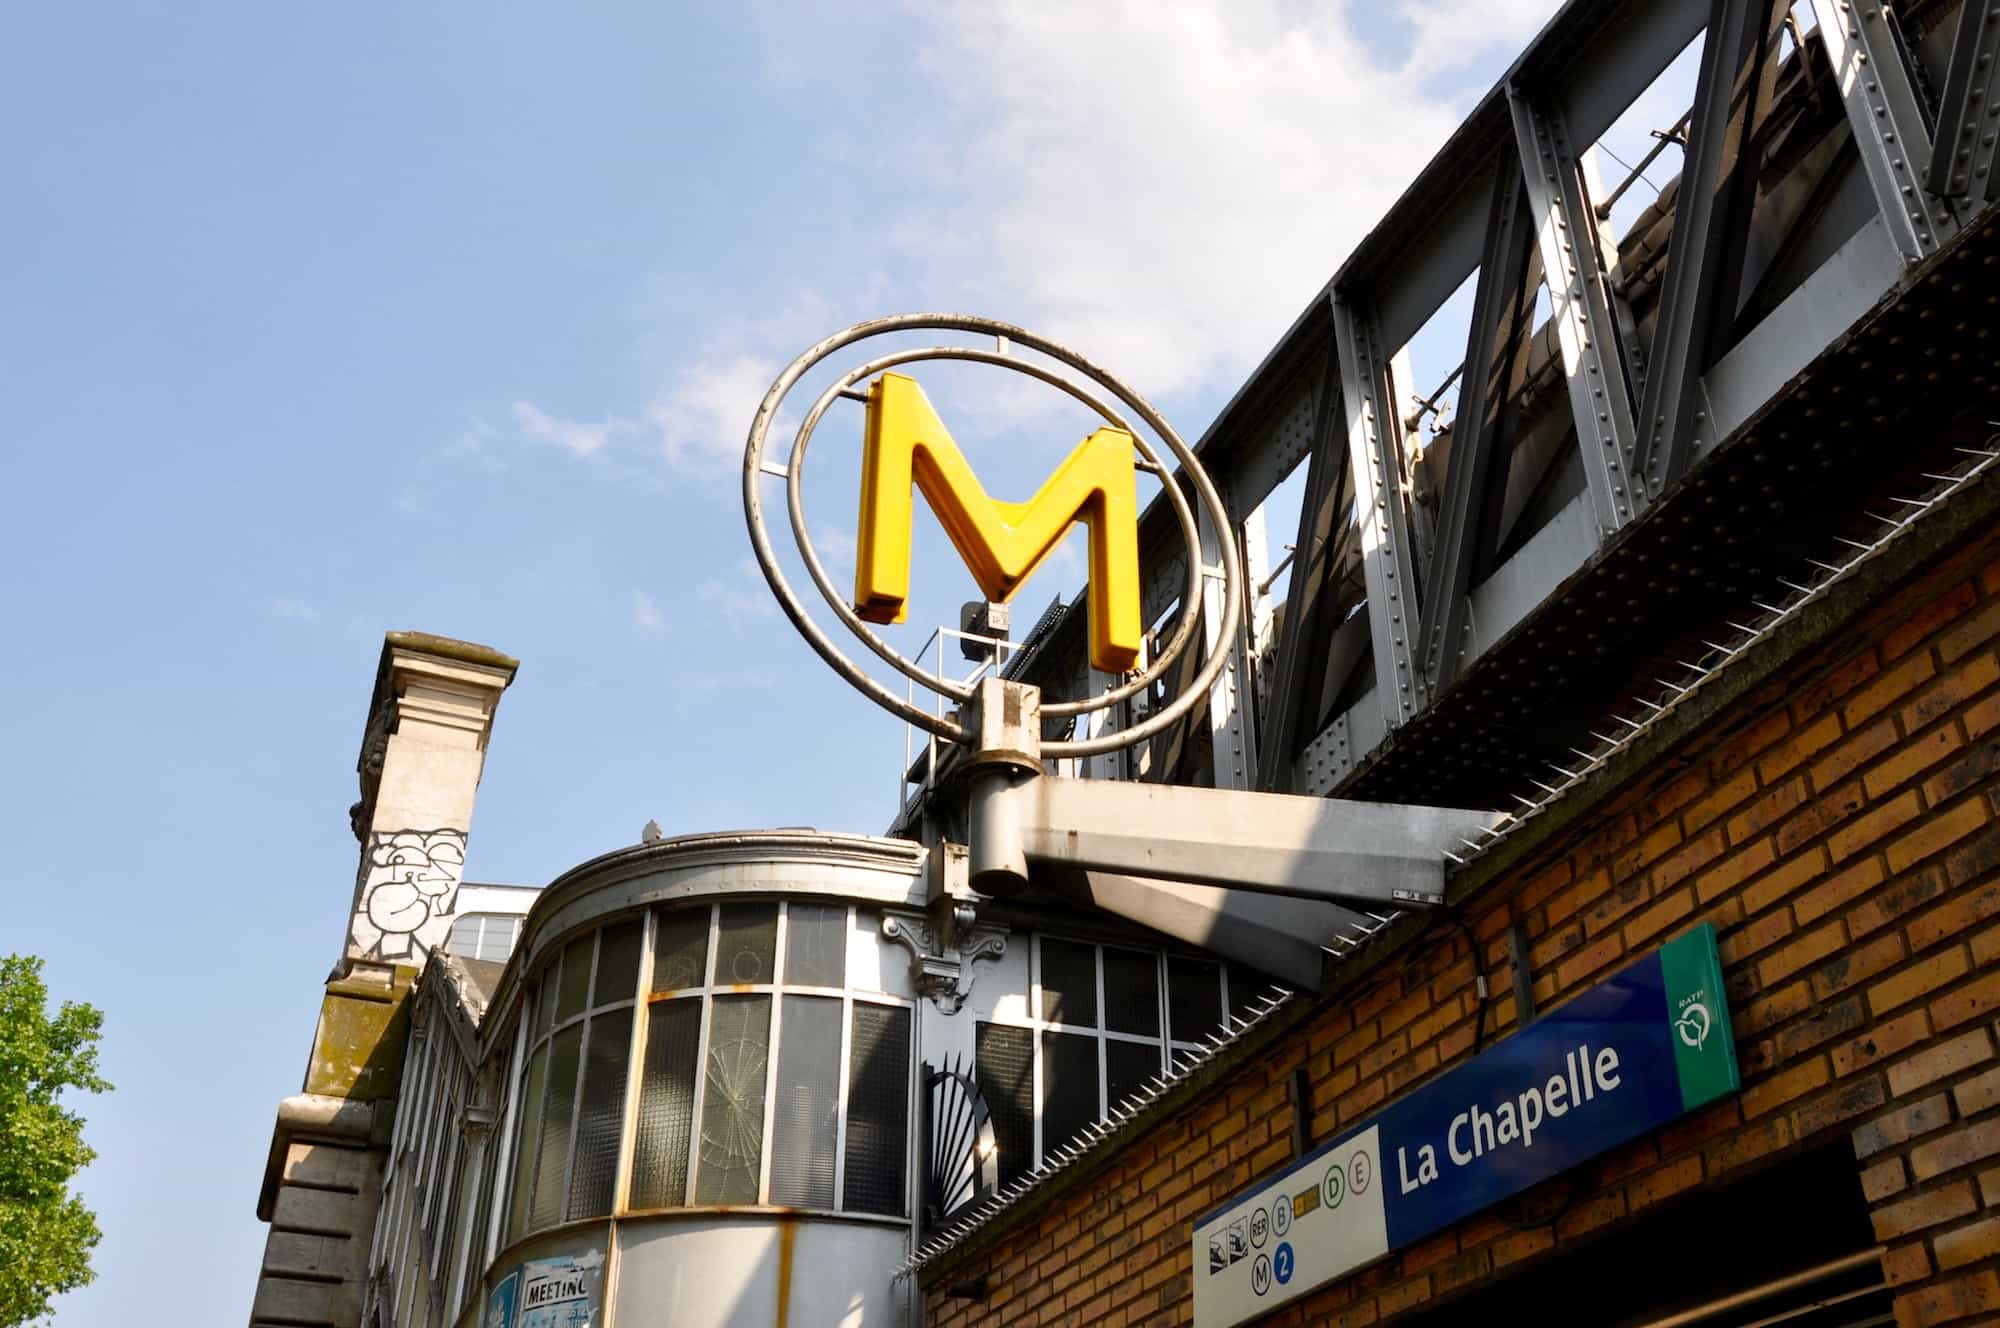 For authentic multicultural Paris, get off at La Chapelle metro, also known as the Little India neighborhood.